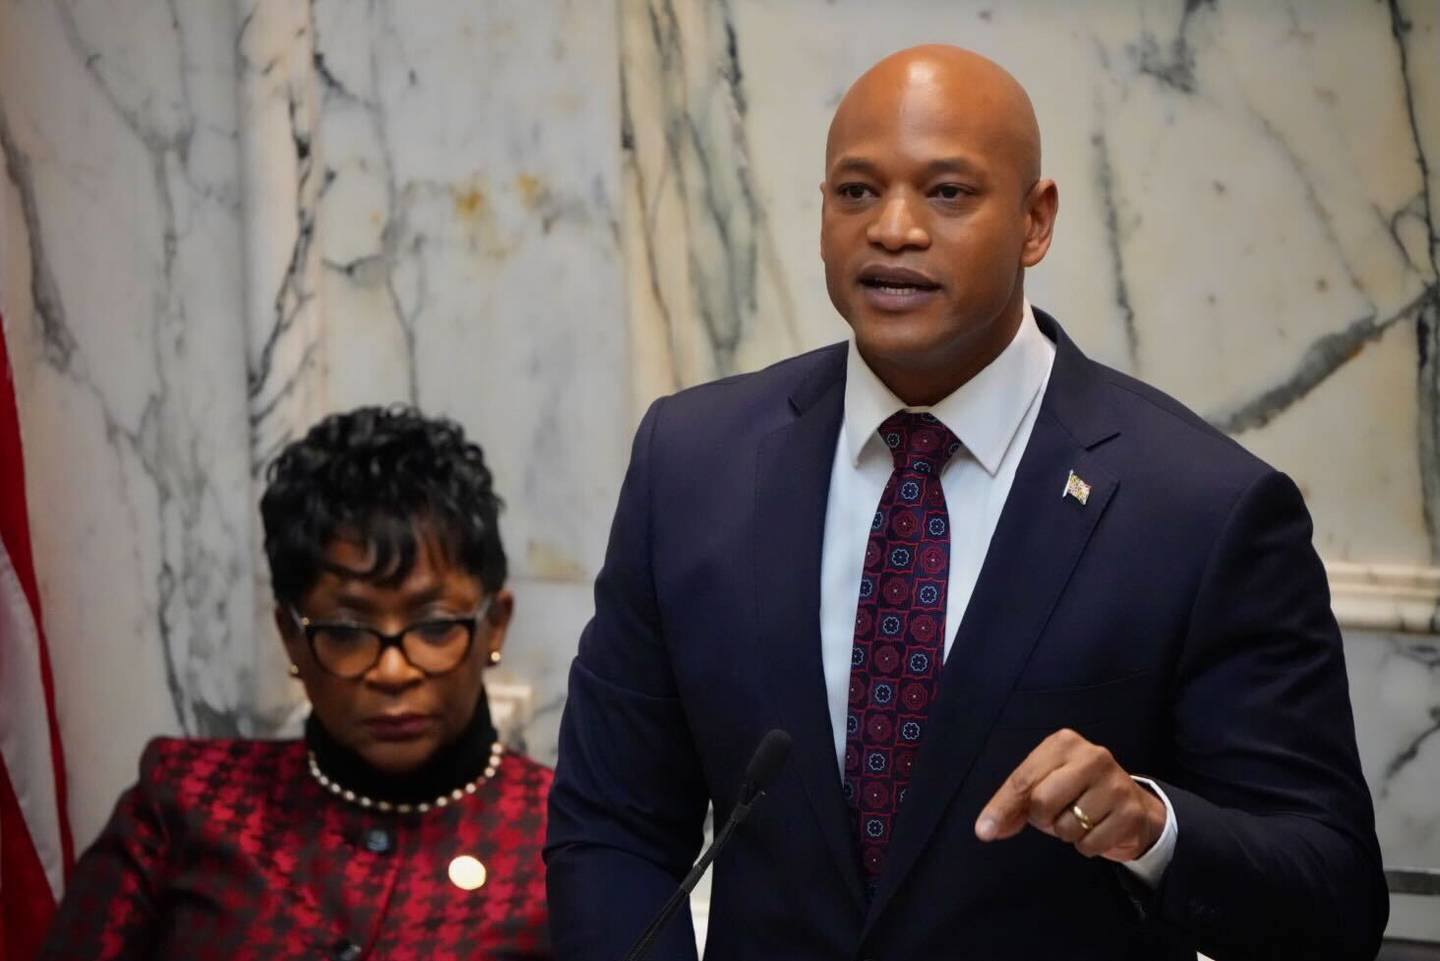 Gov. Wes Moore, in a blue suit, gestures as he gives his State of the State speech. Behind Moore, House Speaker Adrienne A. Moore wears a black and red outfit.